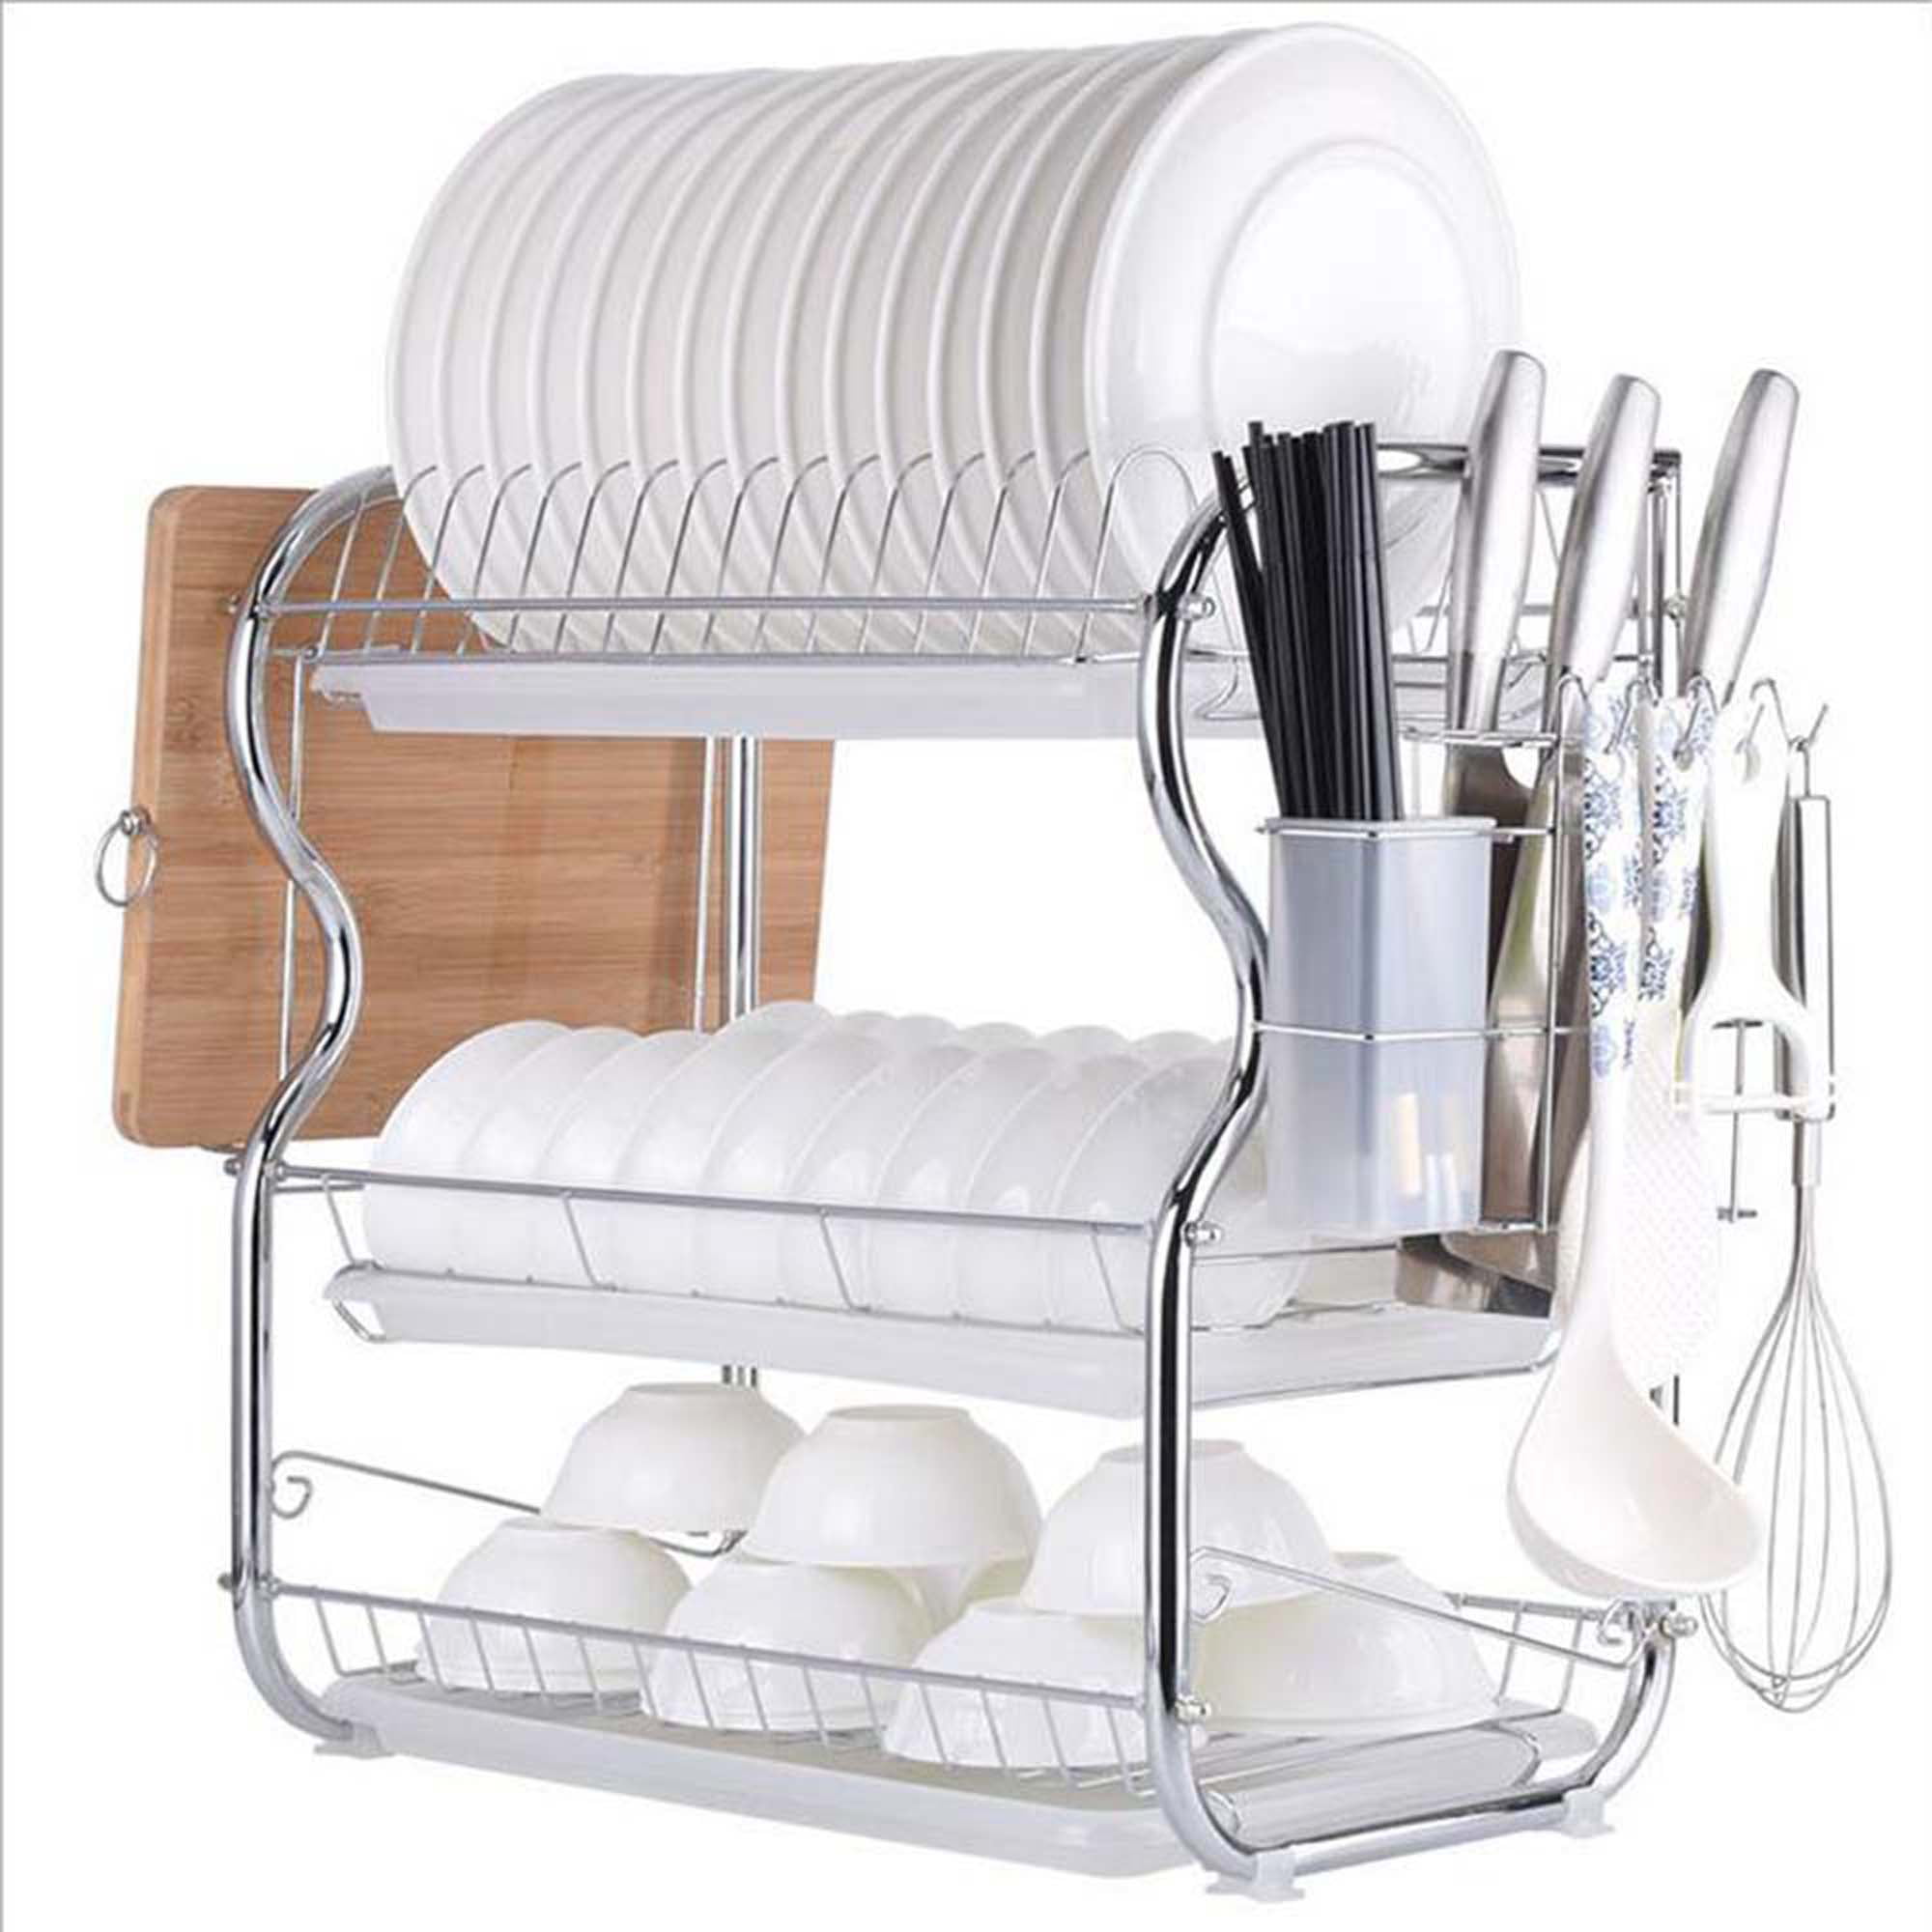 NK Stainless Steel 3 Tiers Dish Drying Rack Dish Drainer Drying Rack Stainless Steel Drying Dish Rack